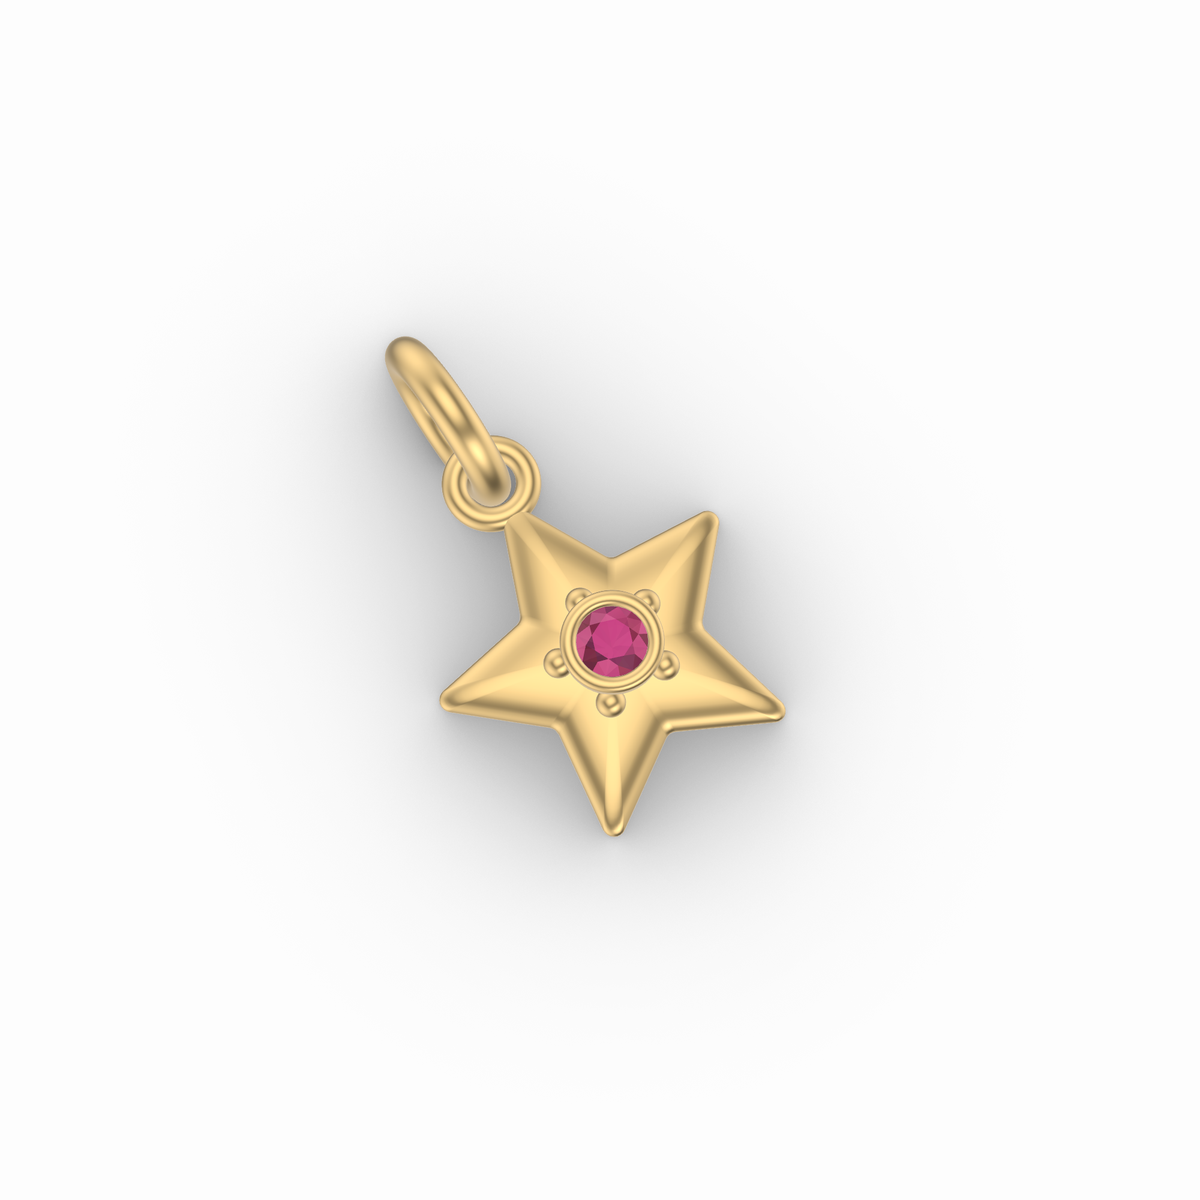 Little Star Studded Charm | Gold Pendant | Choose Your Metal And Gemstone